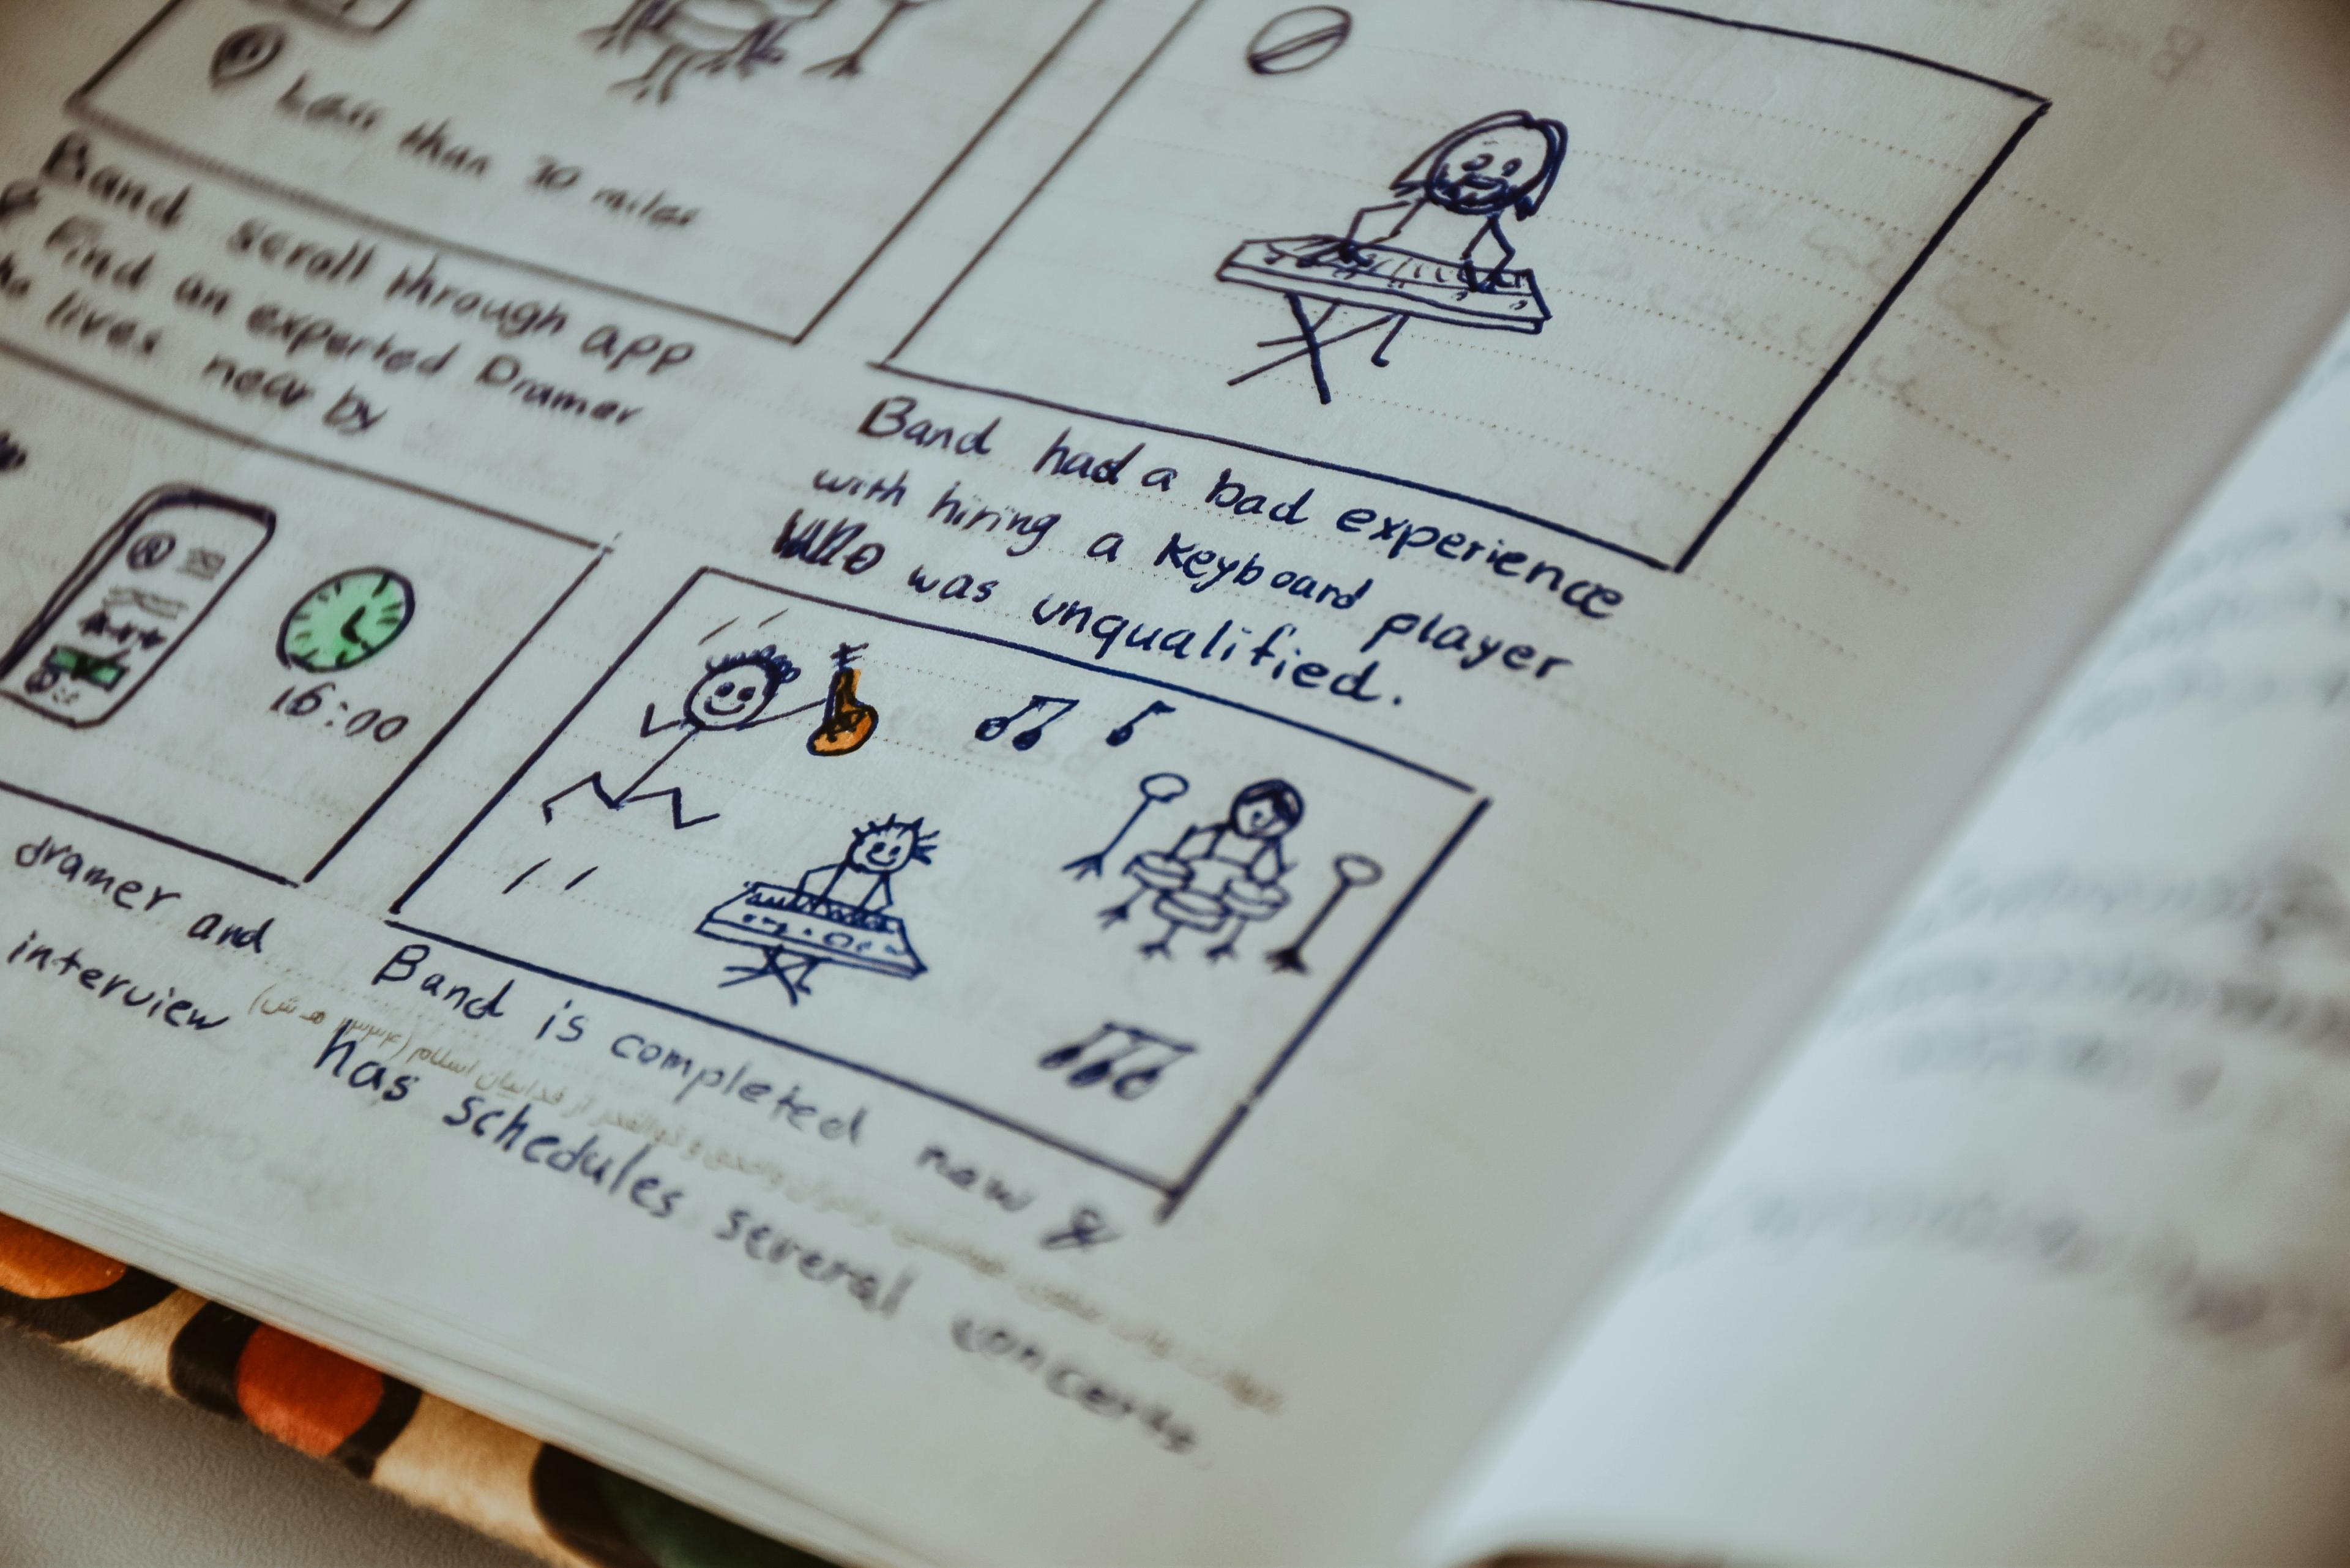 “[concept validation storyboard] including # of storyboards telling the story of an ad campaign”